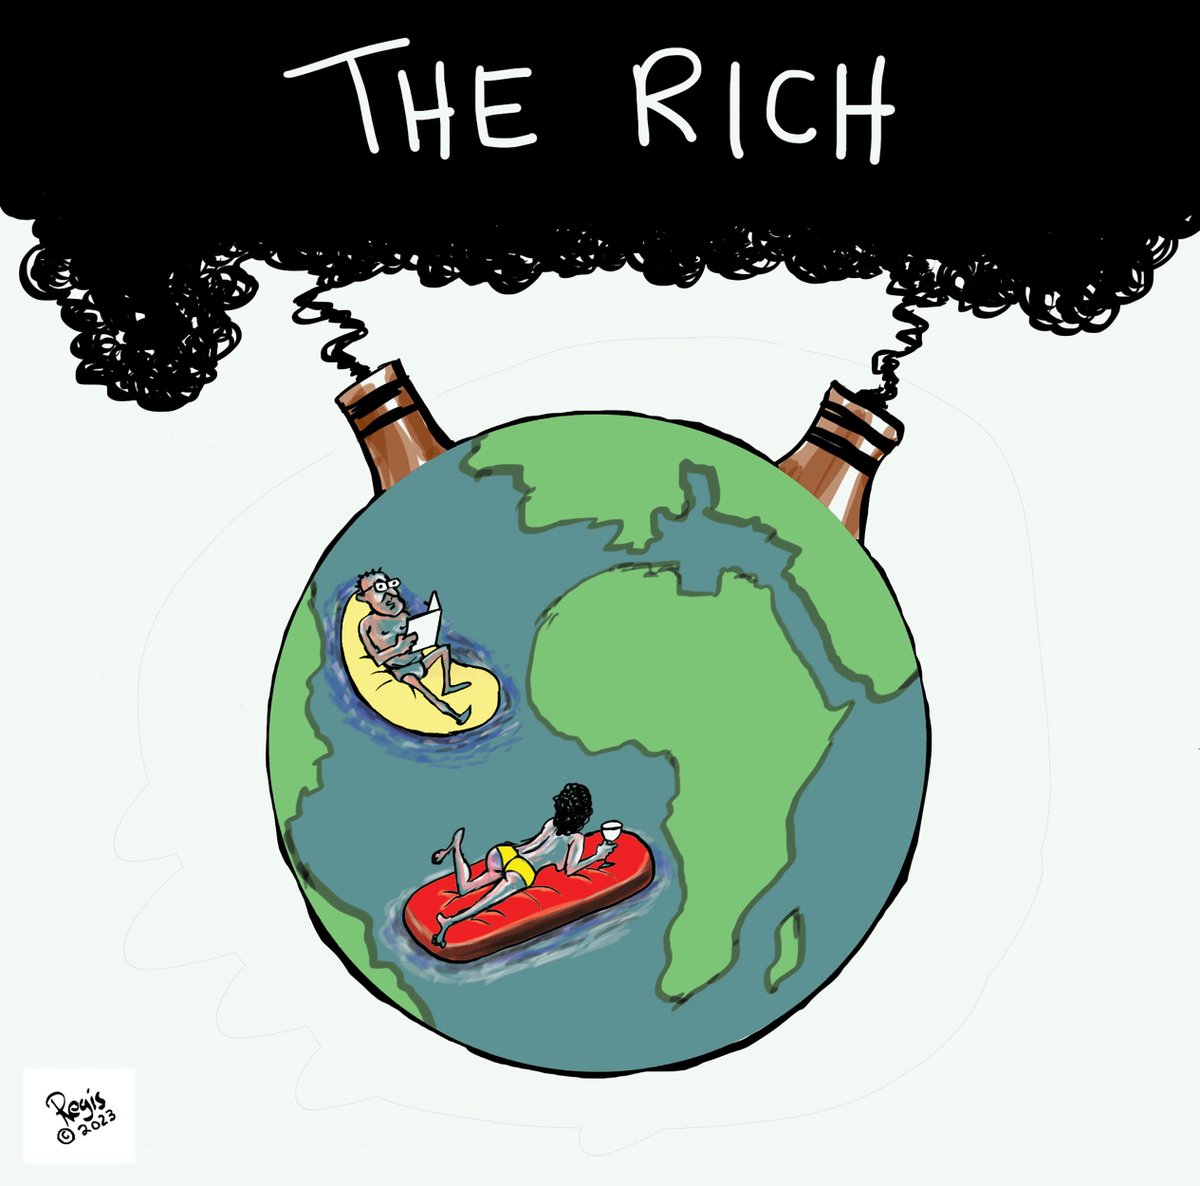 The richest 10% of Europeans produced as much carbon pollution in 2019 as half of Europe’s poorest population according to Oxfam. Sign the petition: eci.ec.europa.eu/038/public/#/s…